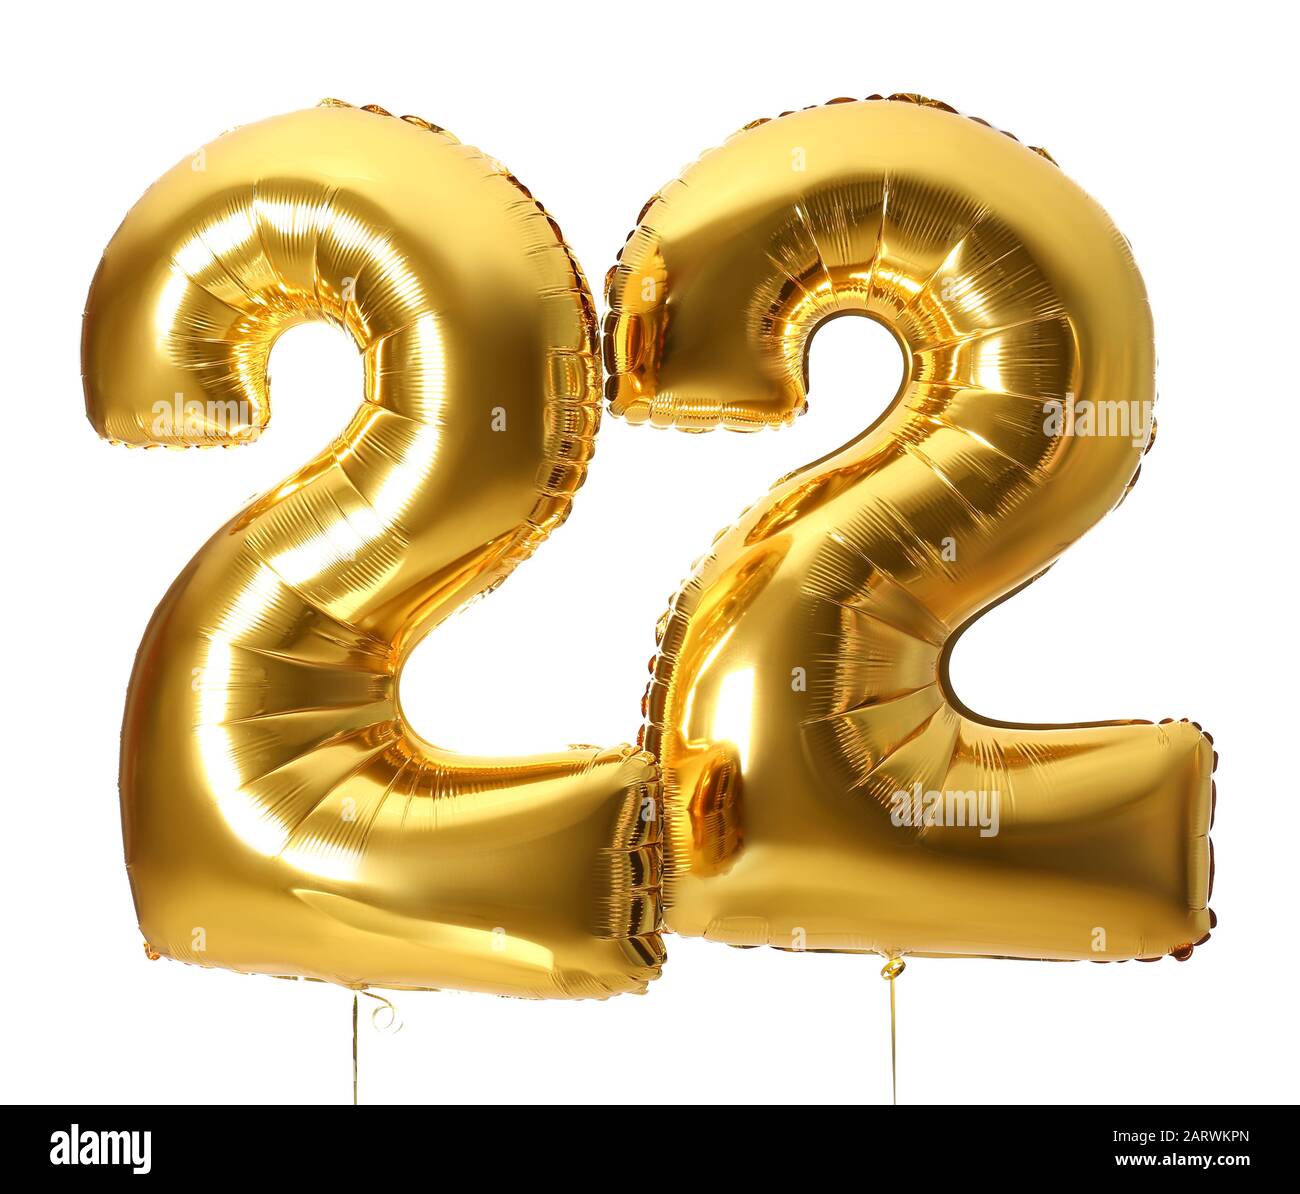 Figure 22 made of balloons on white background Stock Photo - Alamy